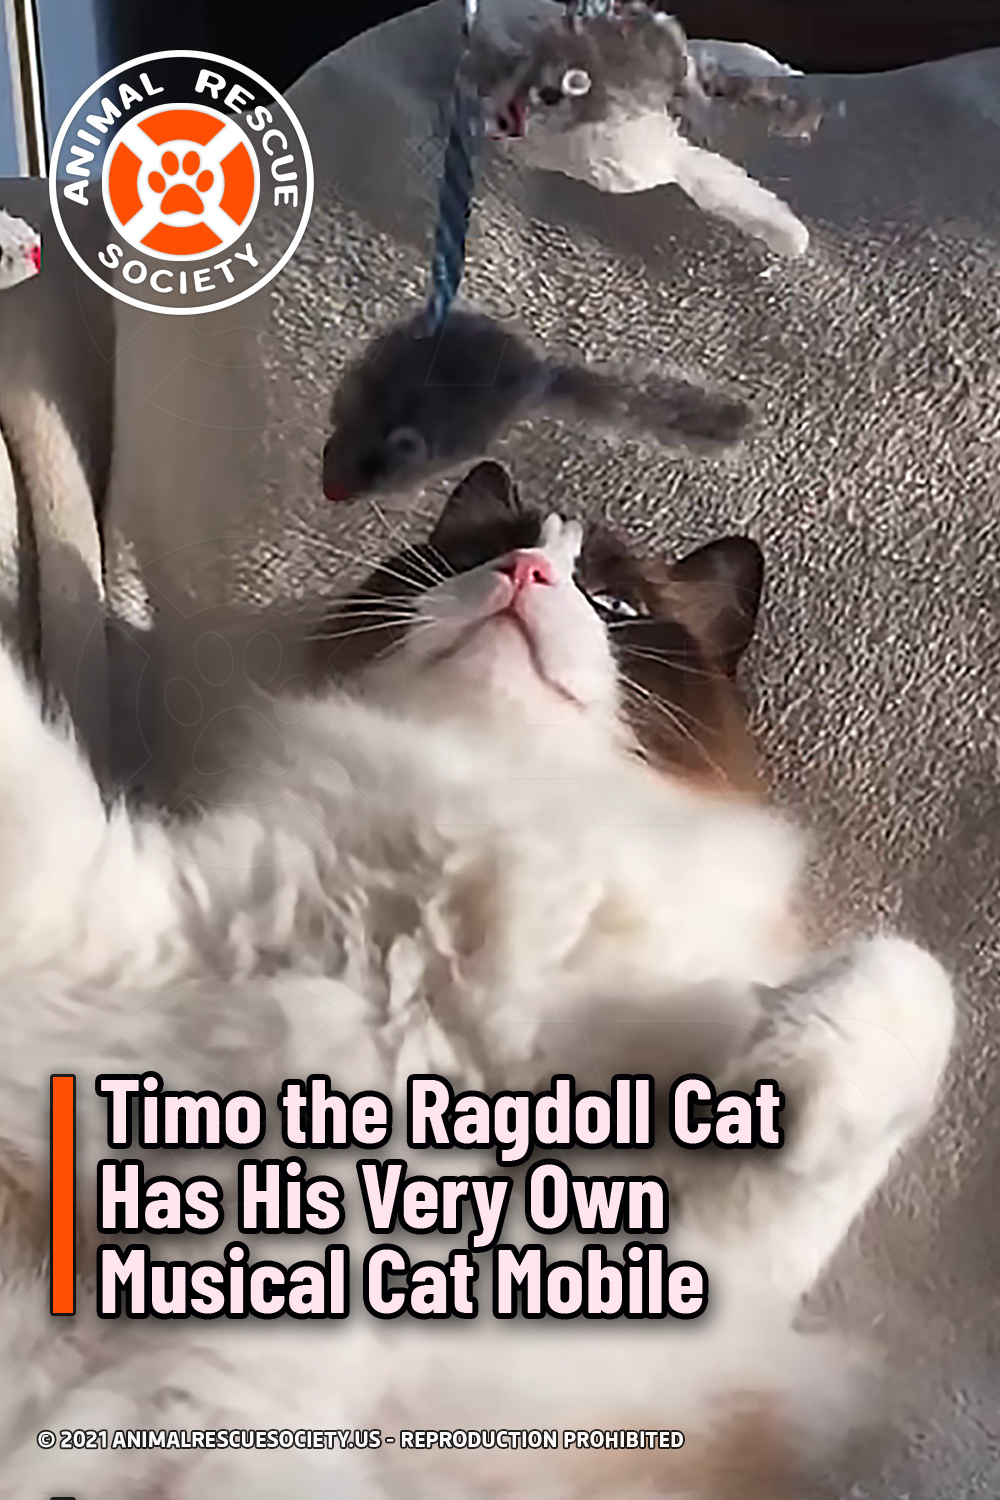 Timo the Ragdoll Cat Has His Very Own Musical Cat Mobile